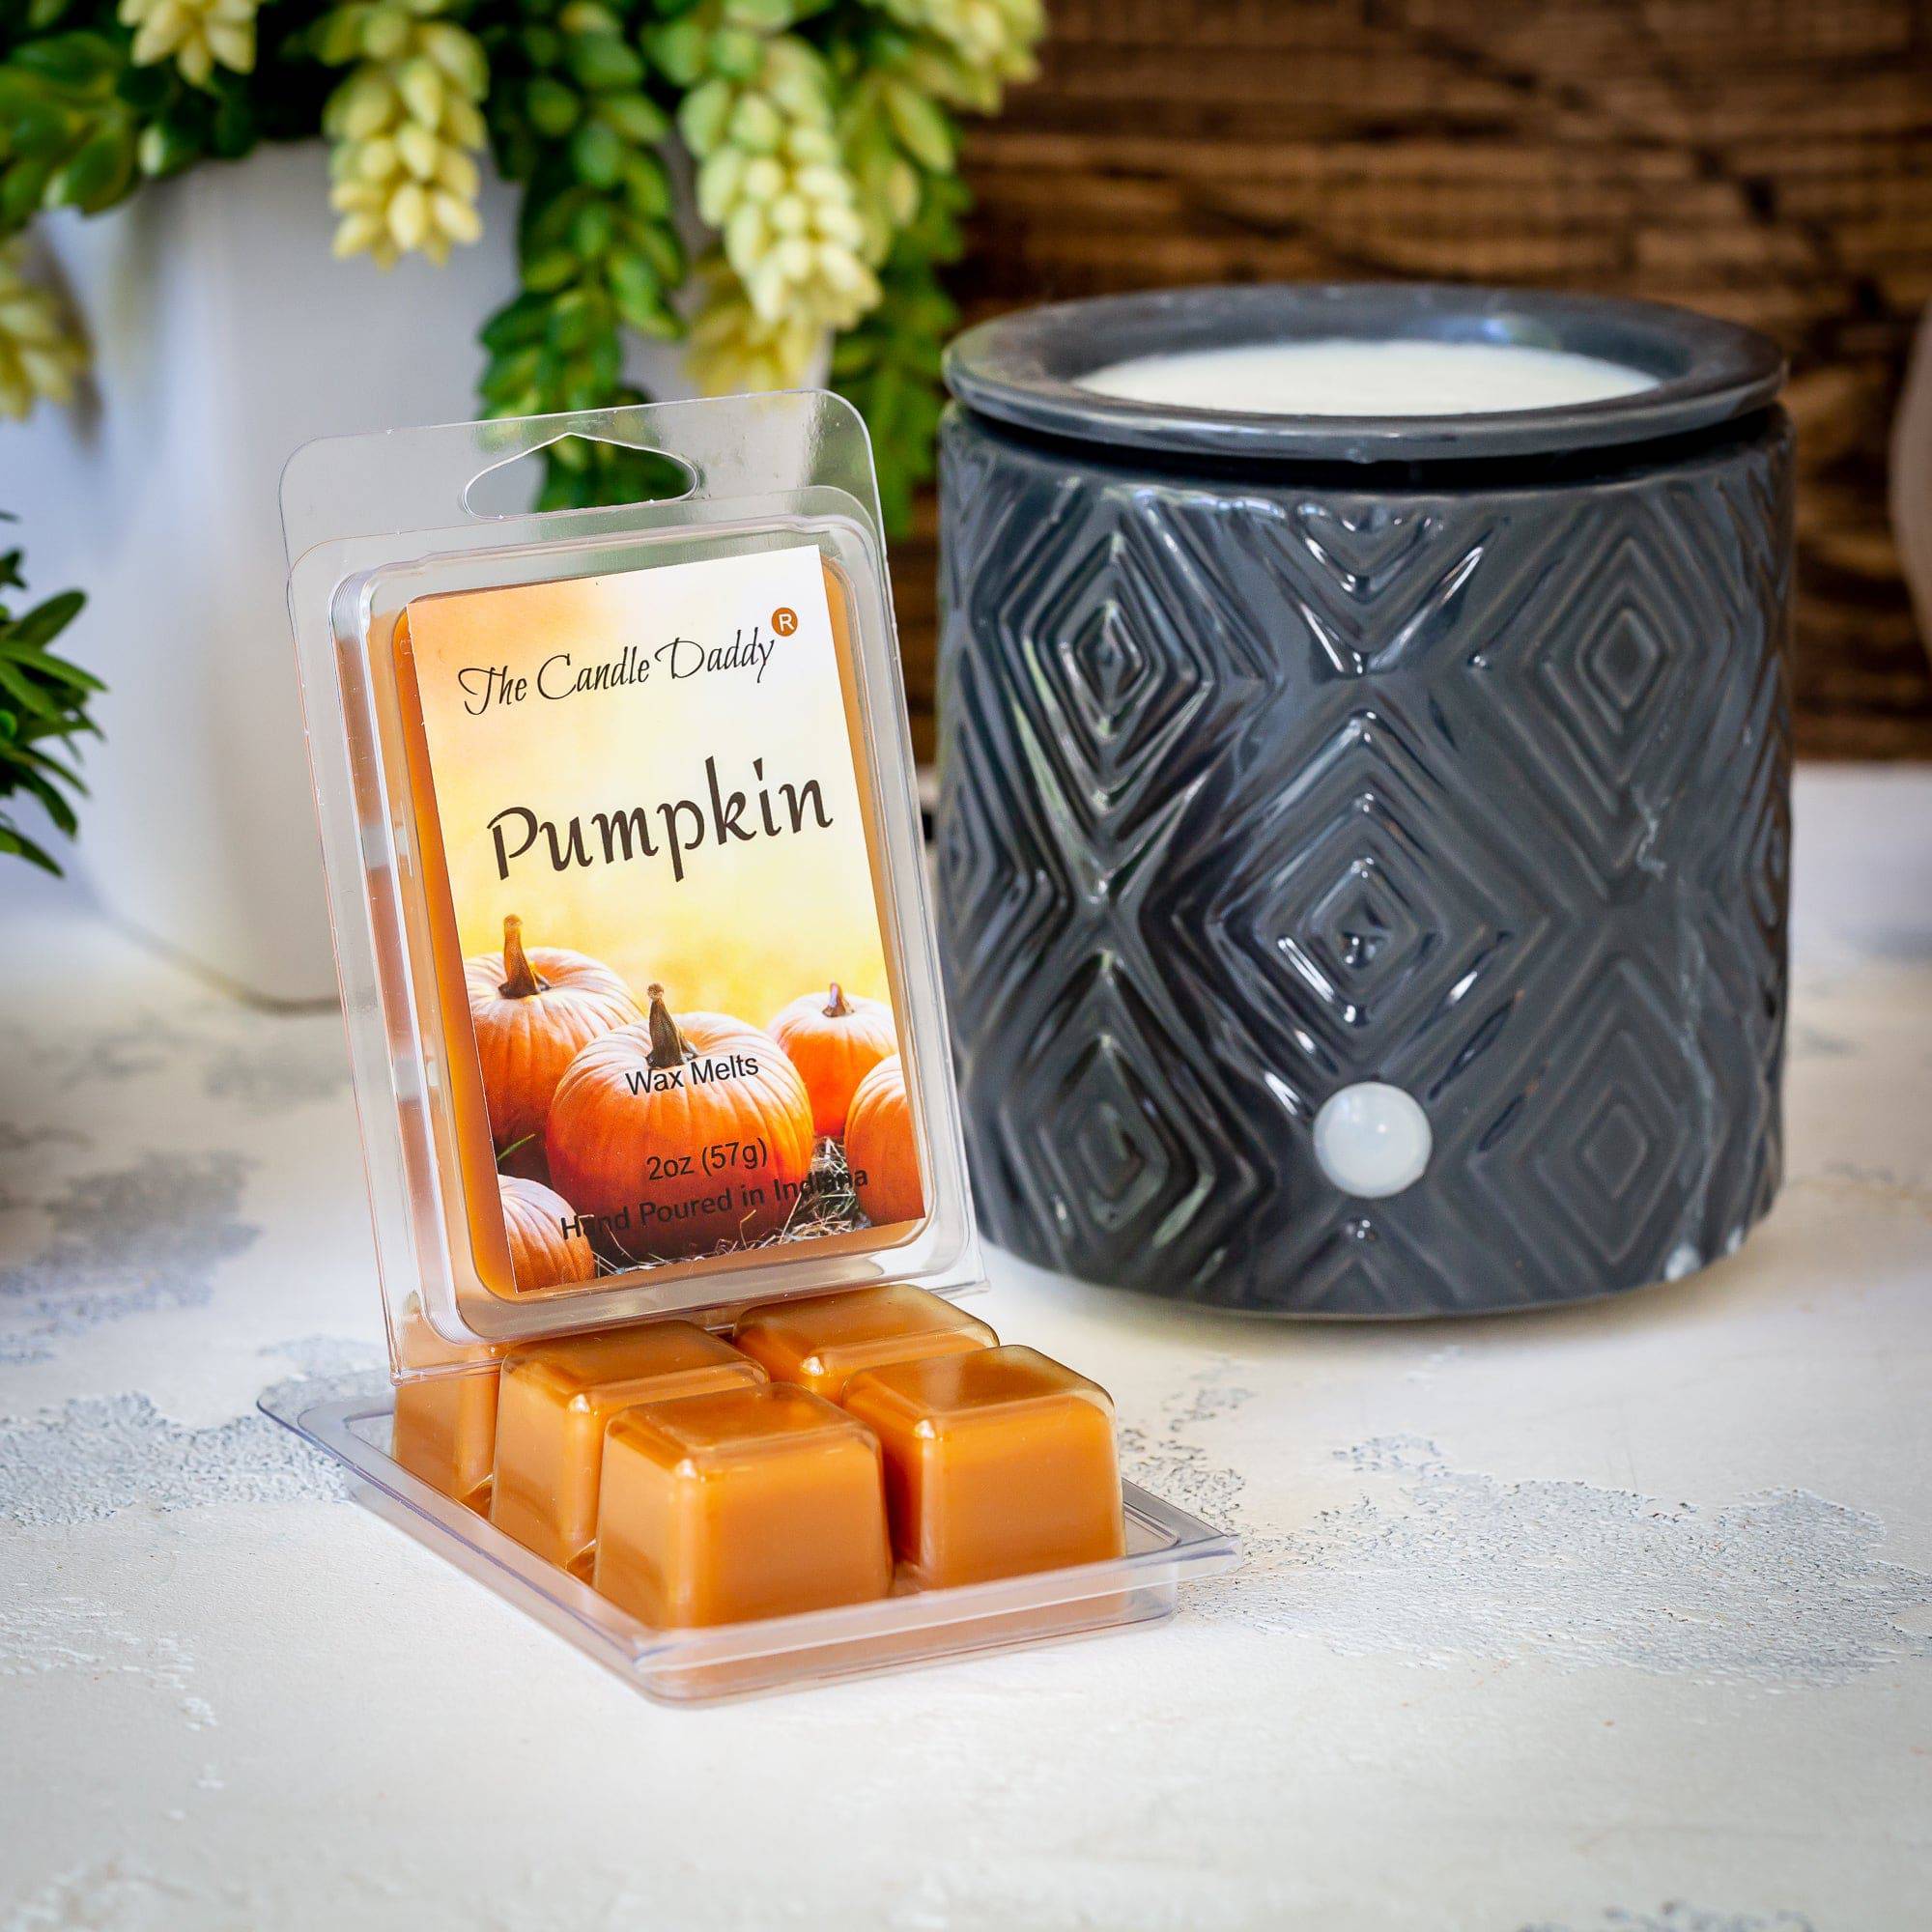 Country Candle Fiji Wax Melts